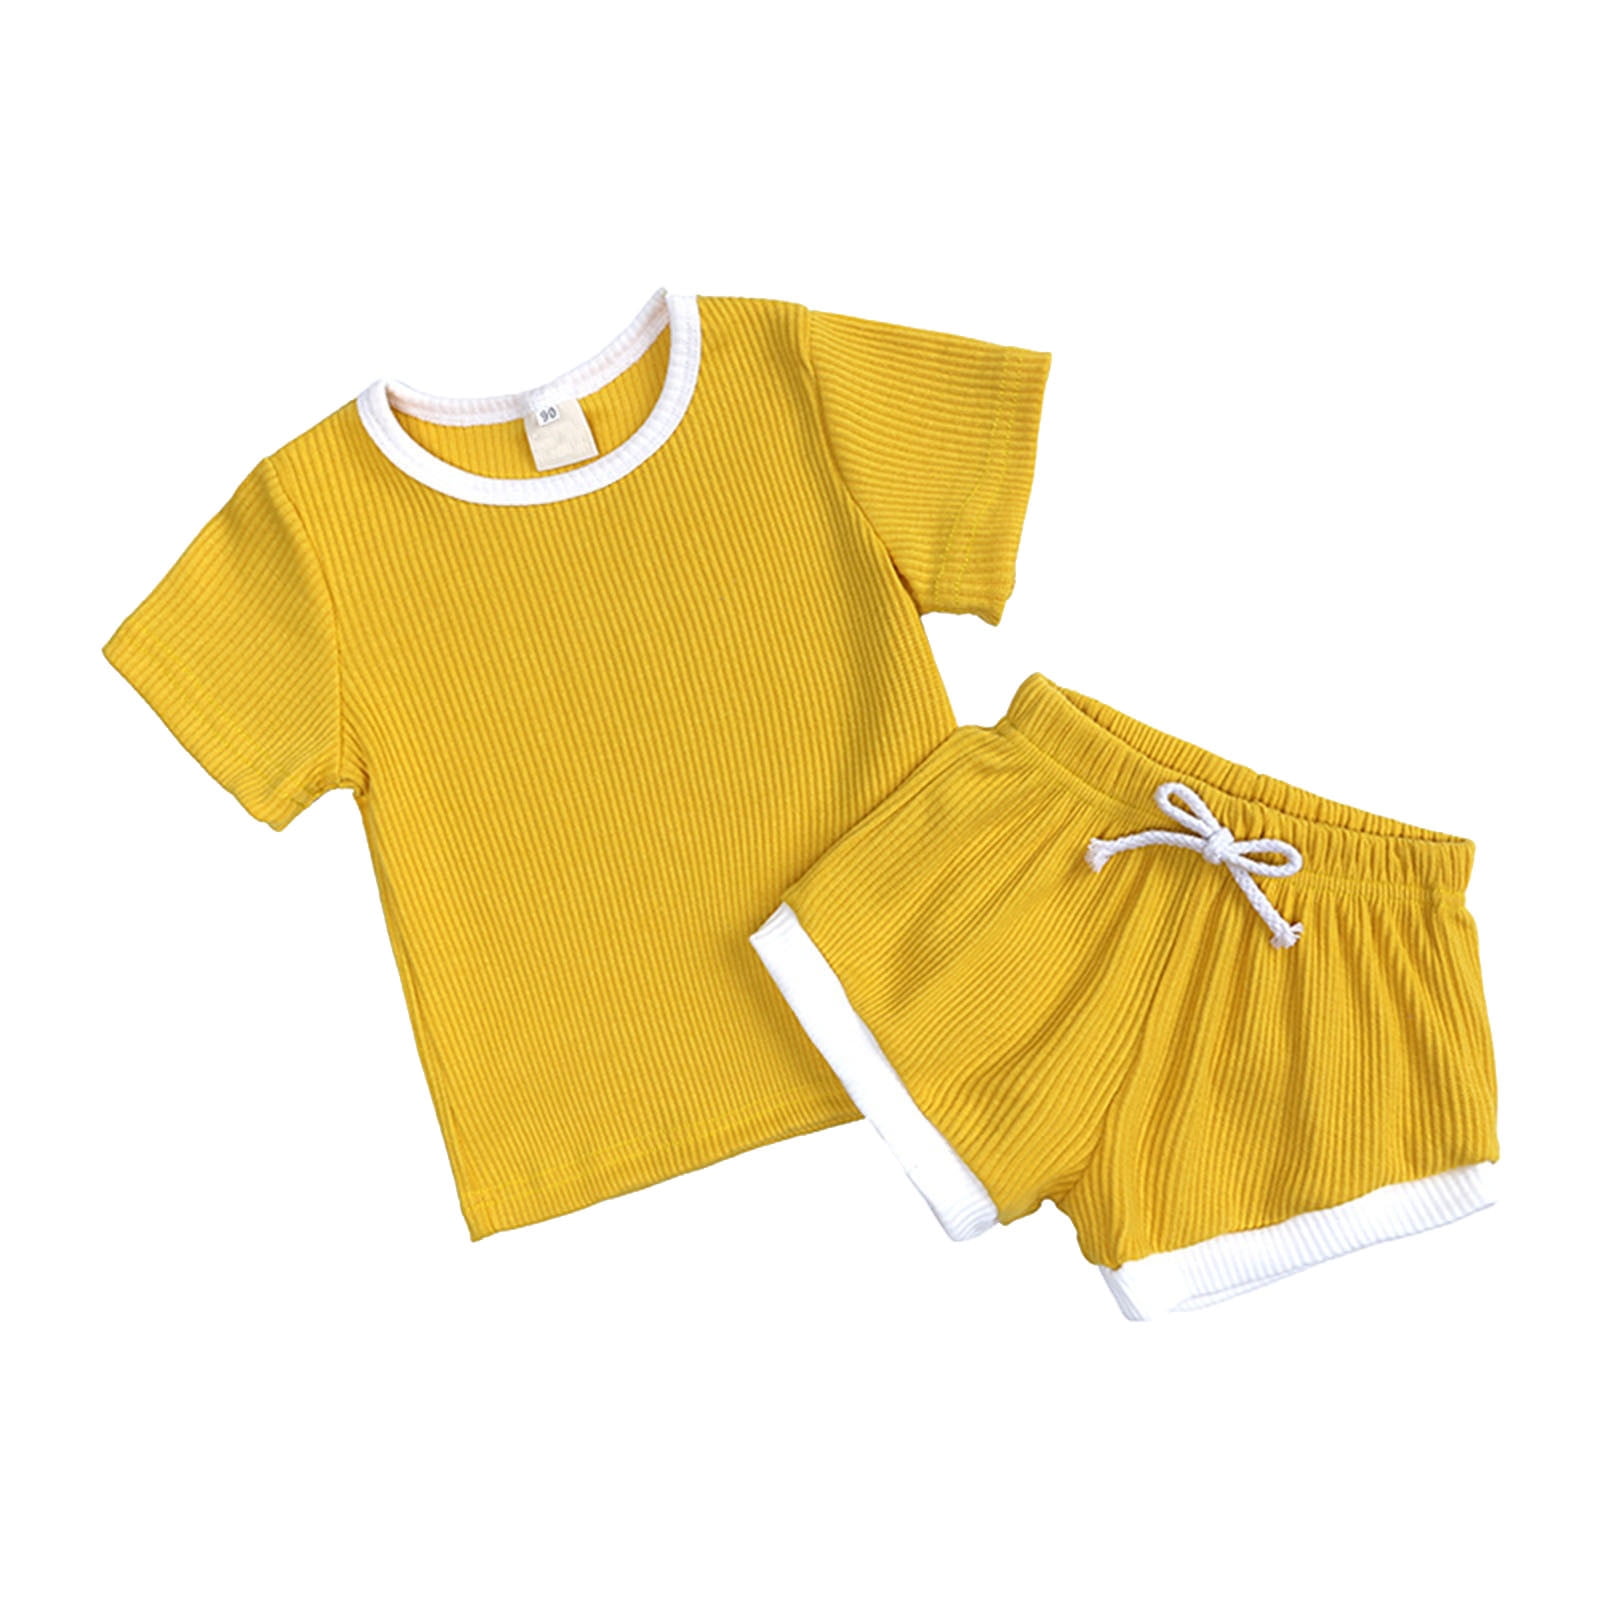 JDEFEG Outfits for School Teen Girls Baby Kids Girls Boys Autumn Solid  Cotton Short Sleeve T Shirt Long Pants Set Outfits Clothes 3Month 6Month  Baby